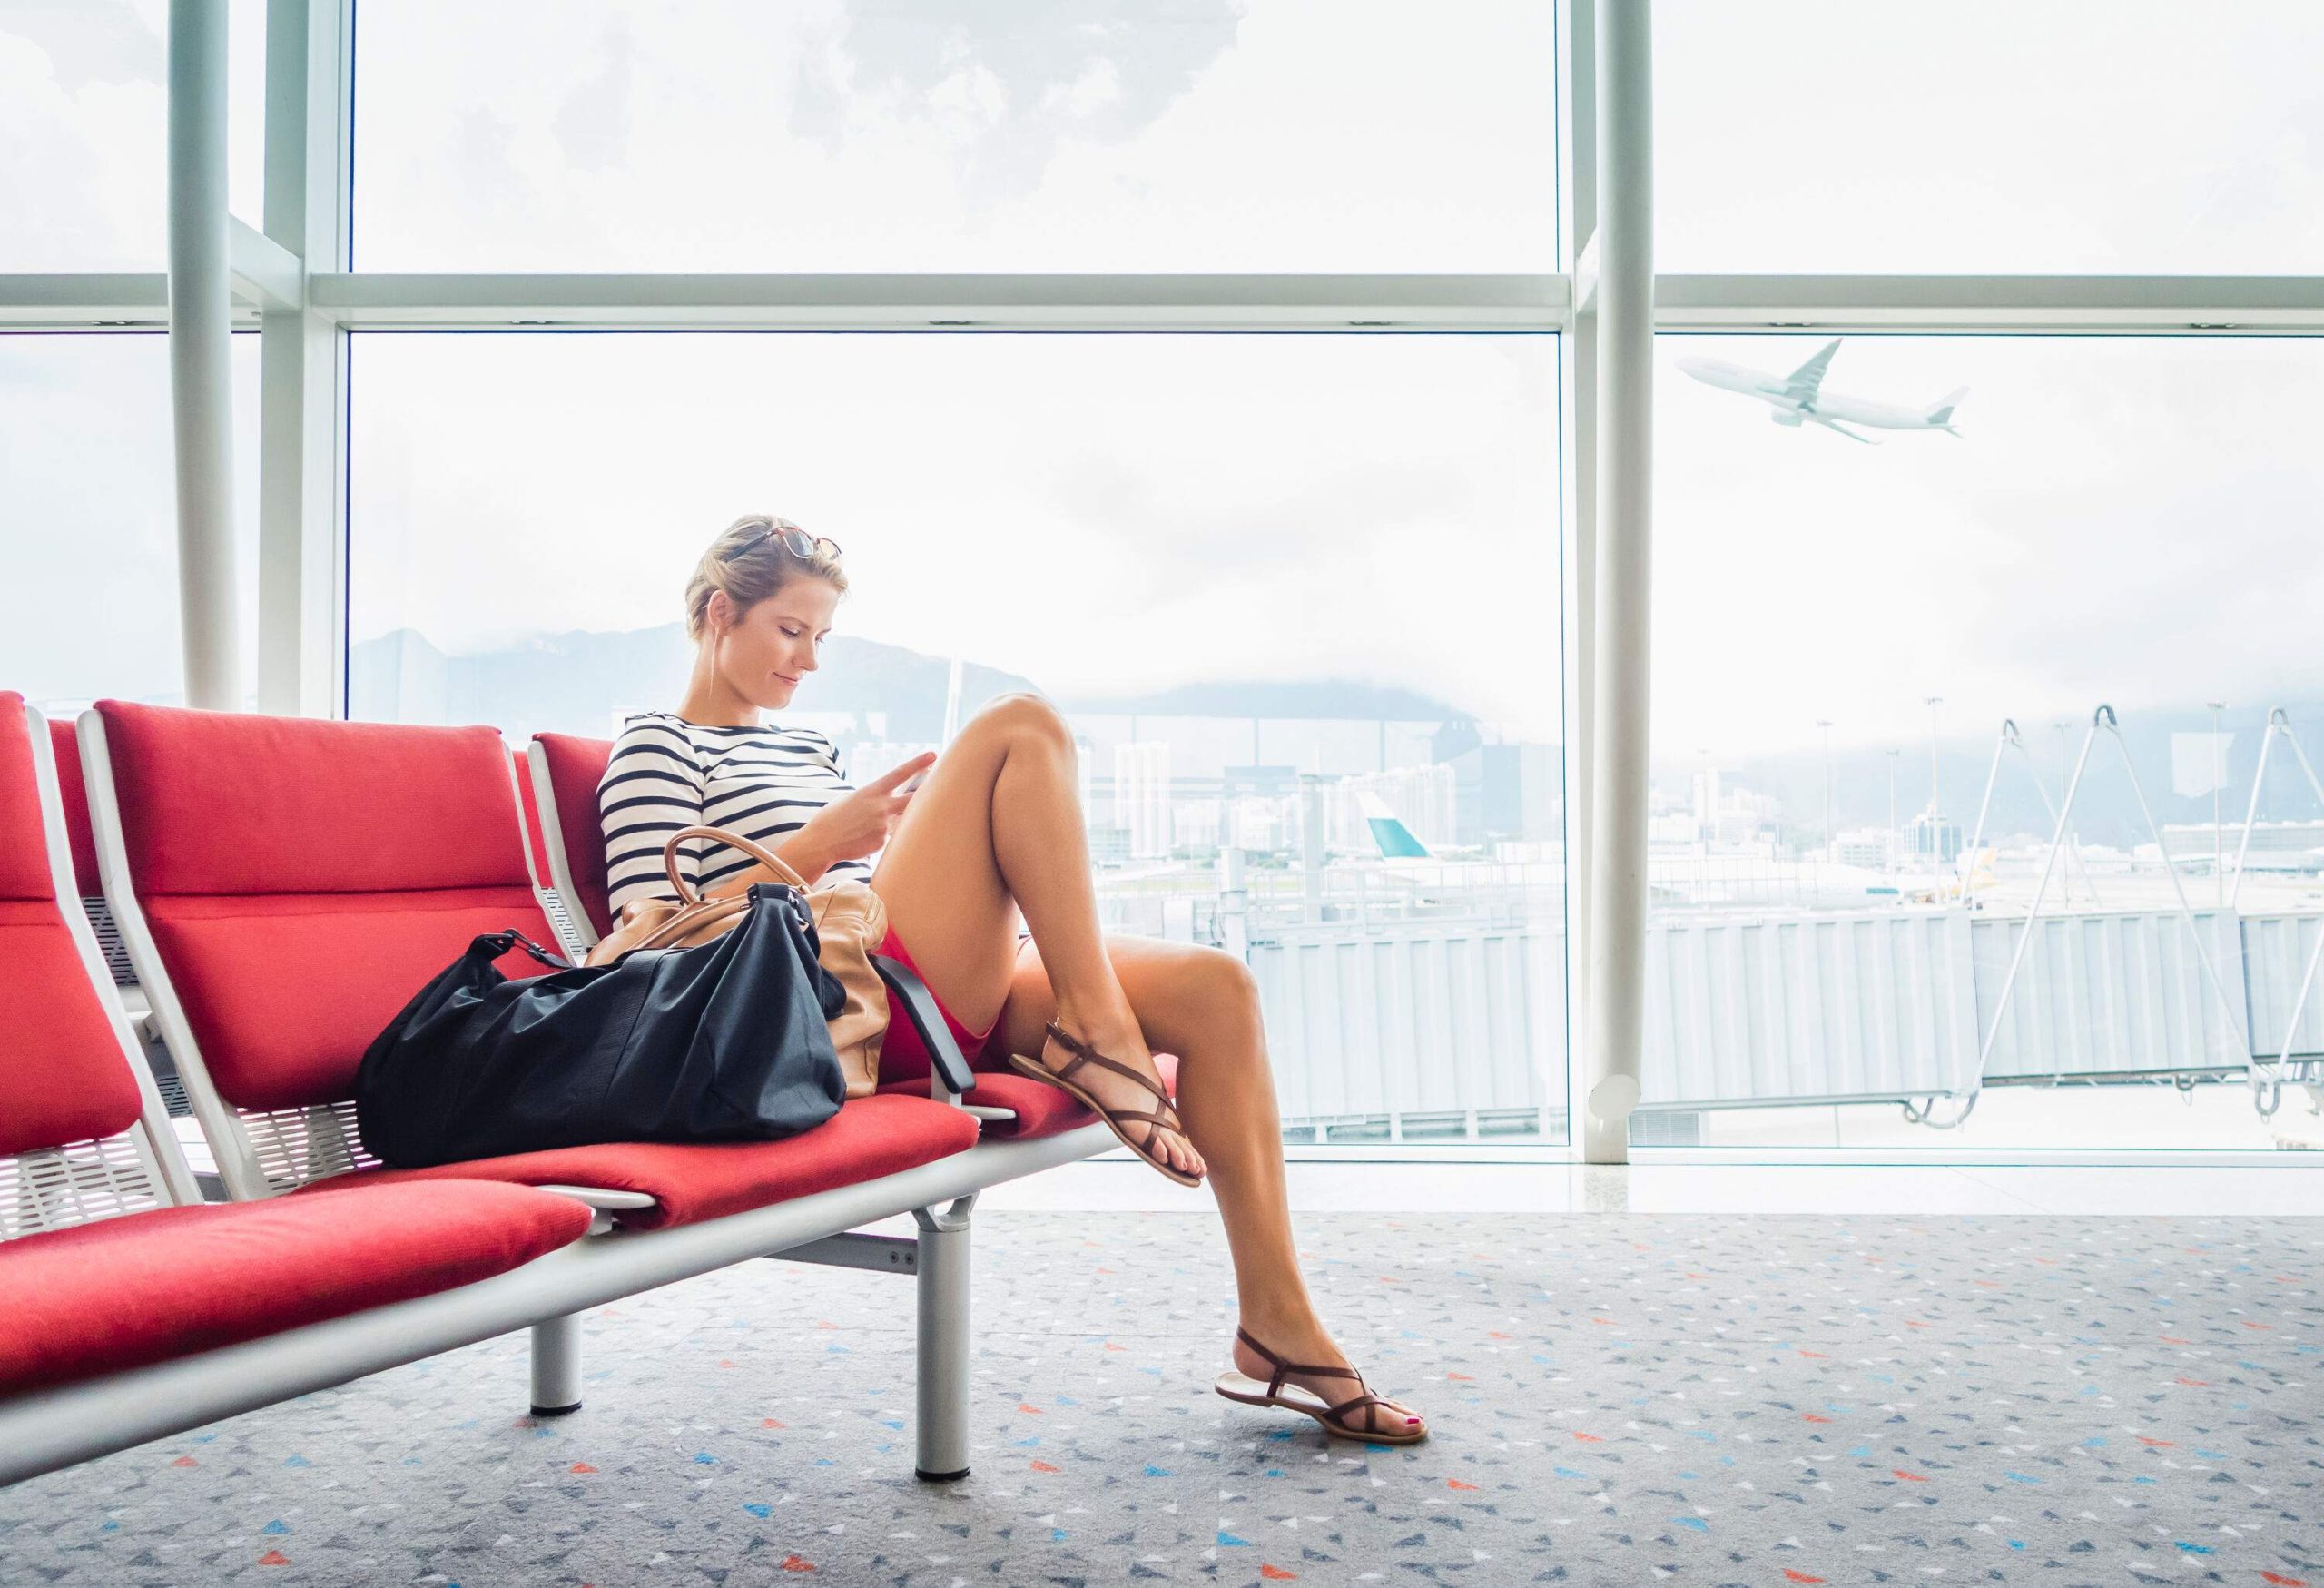 A female passenger sitting in an airport terminal, passing the time with her smartphone.